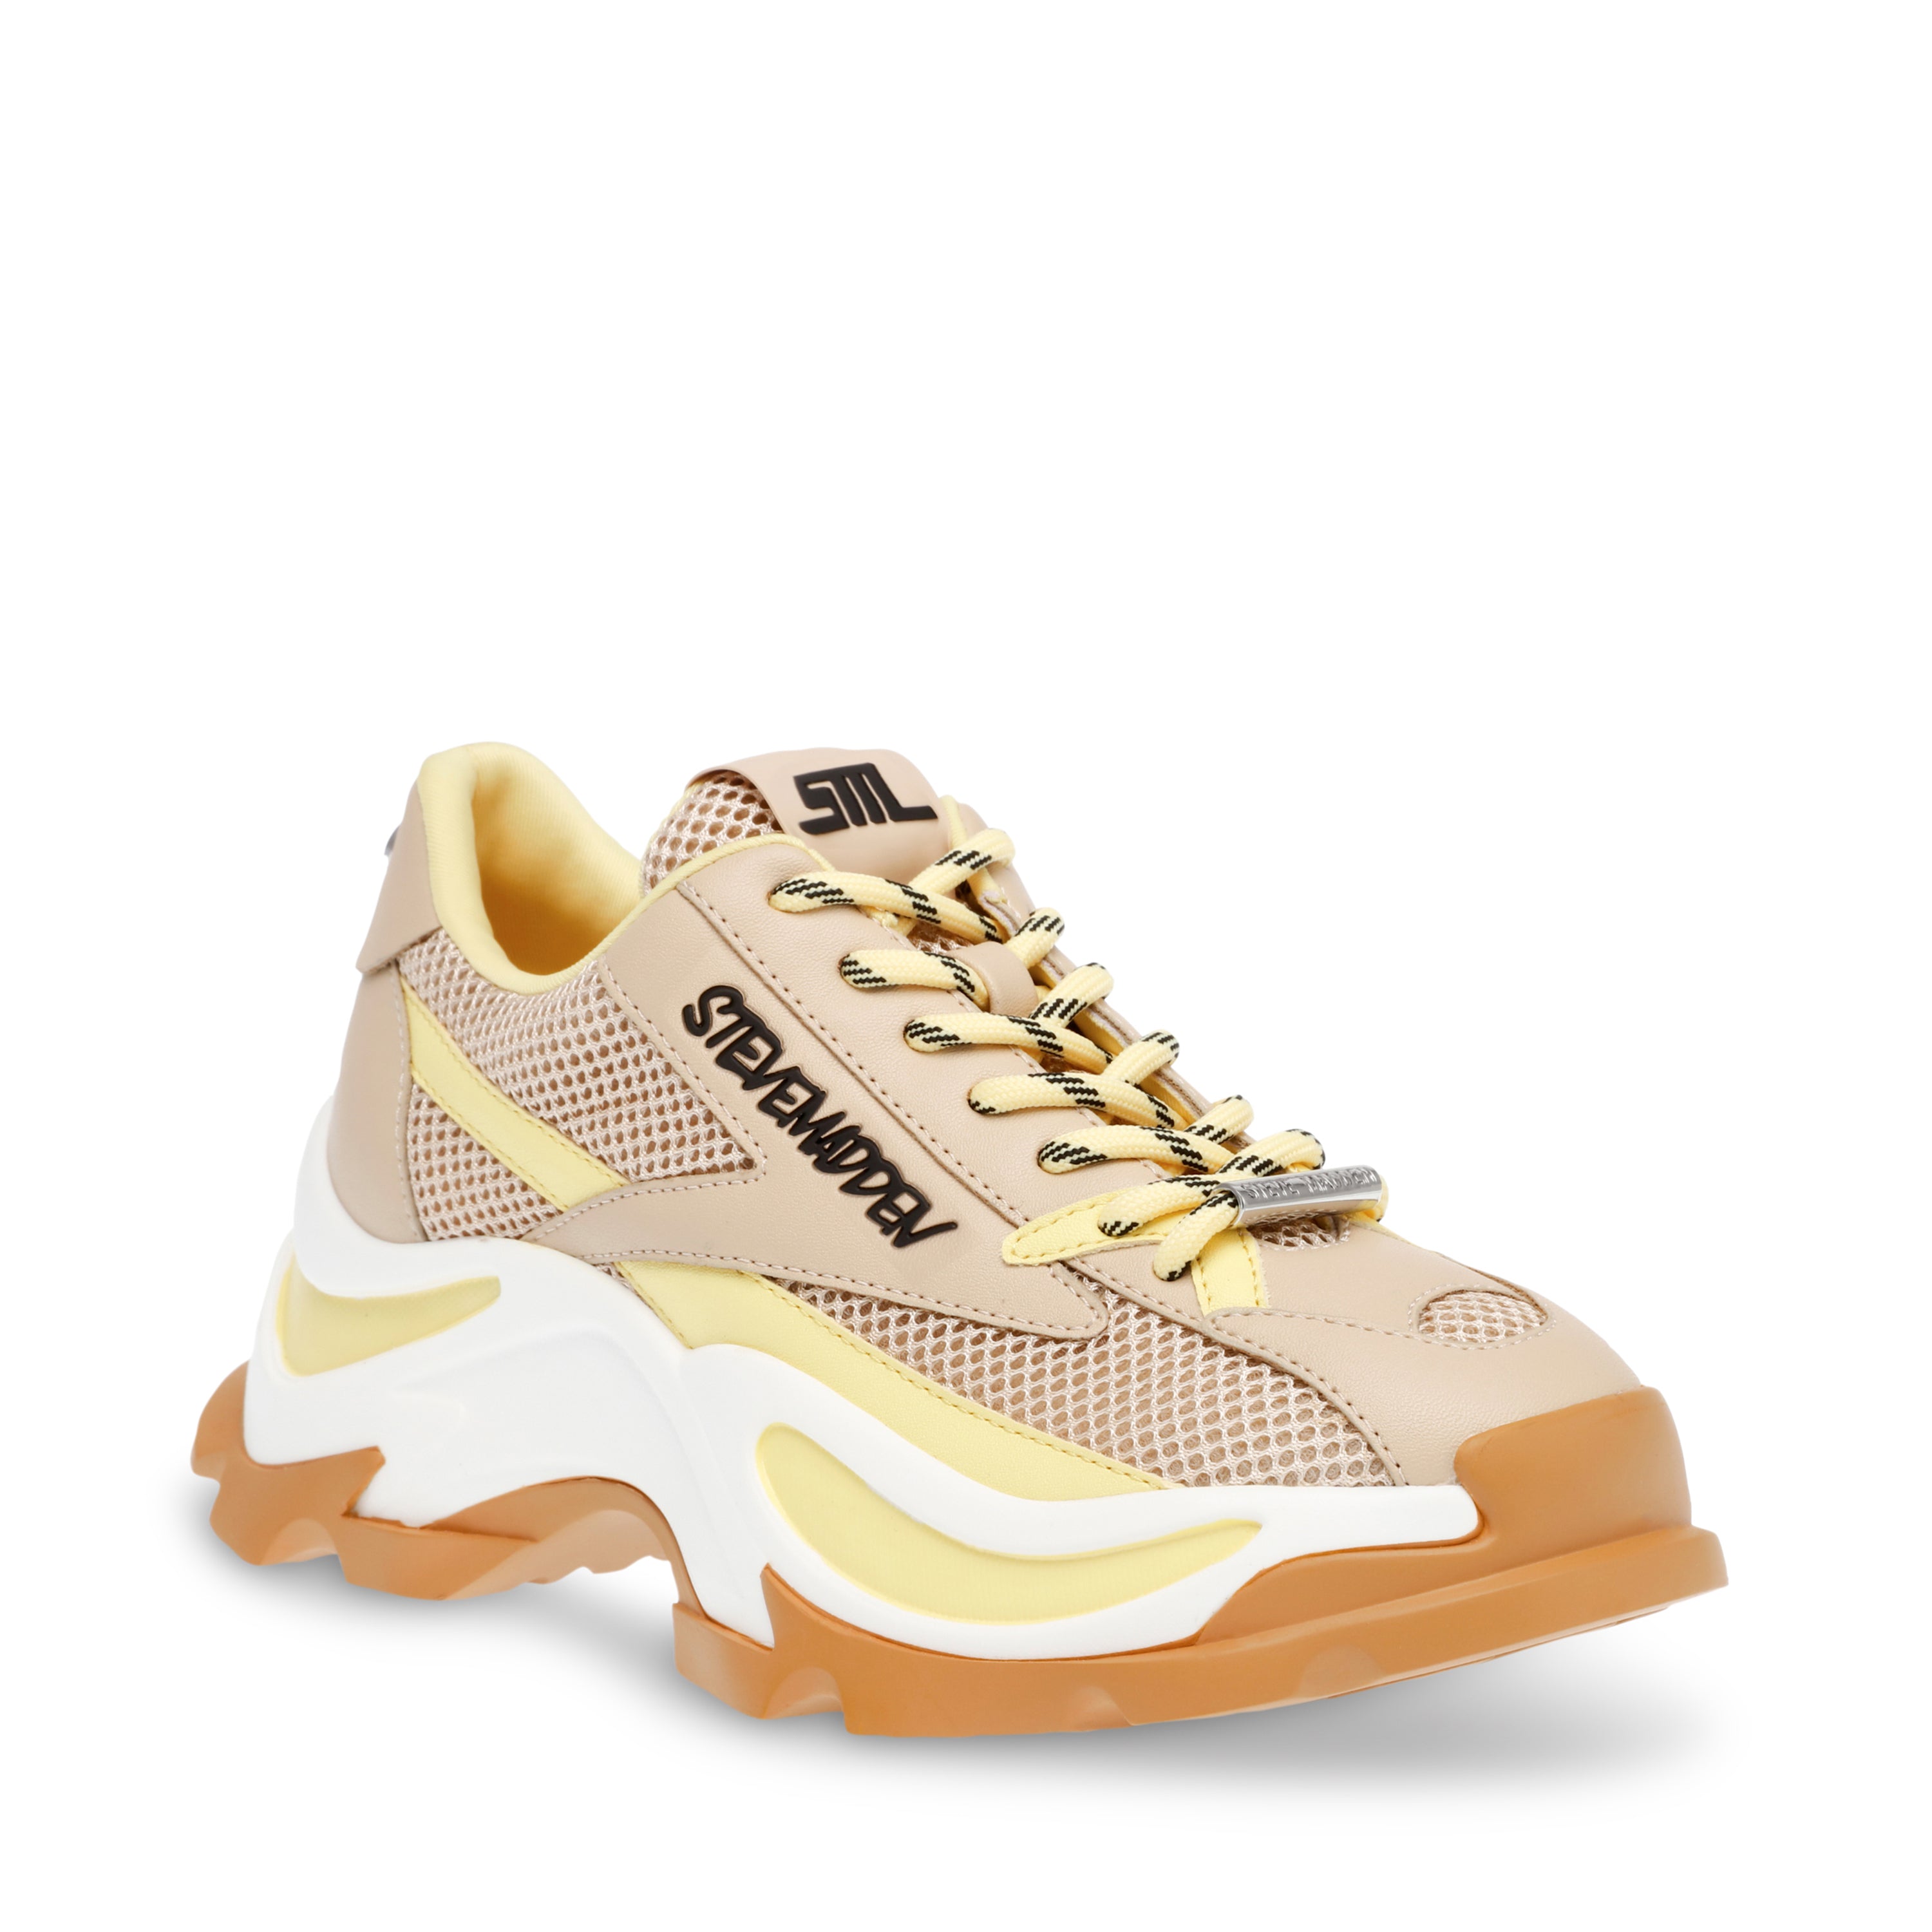 Zoomz Sneaker Light Yellow/Sand- Hover Image